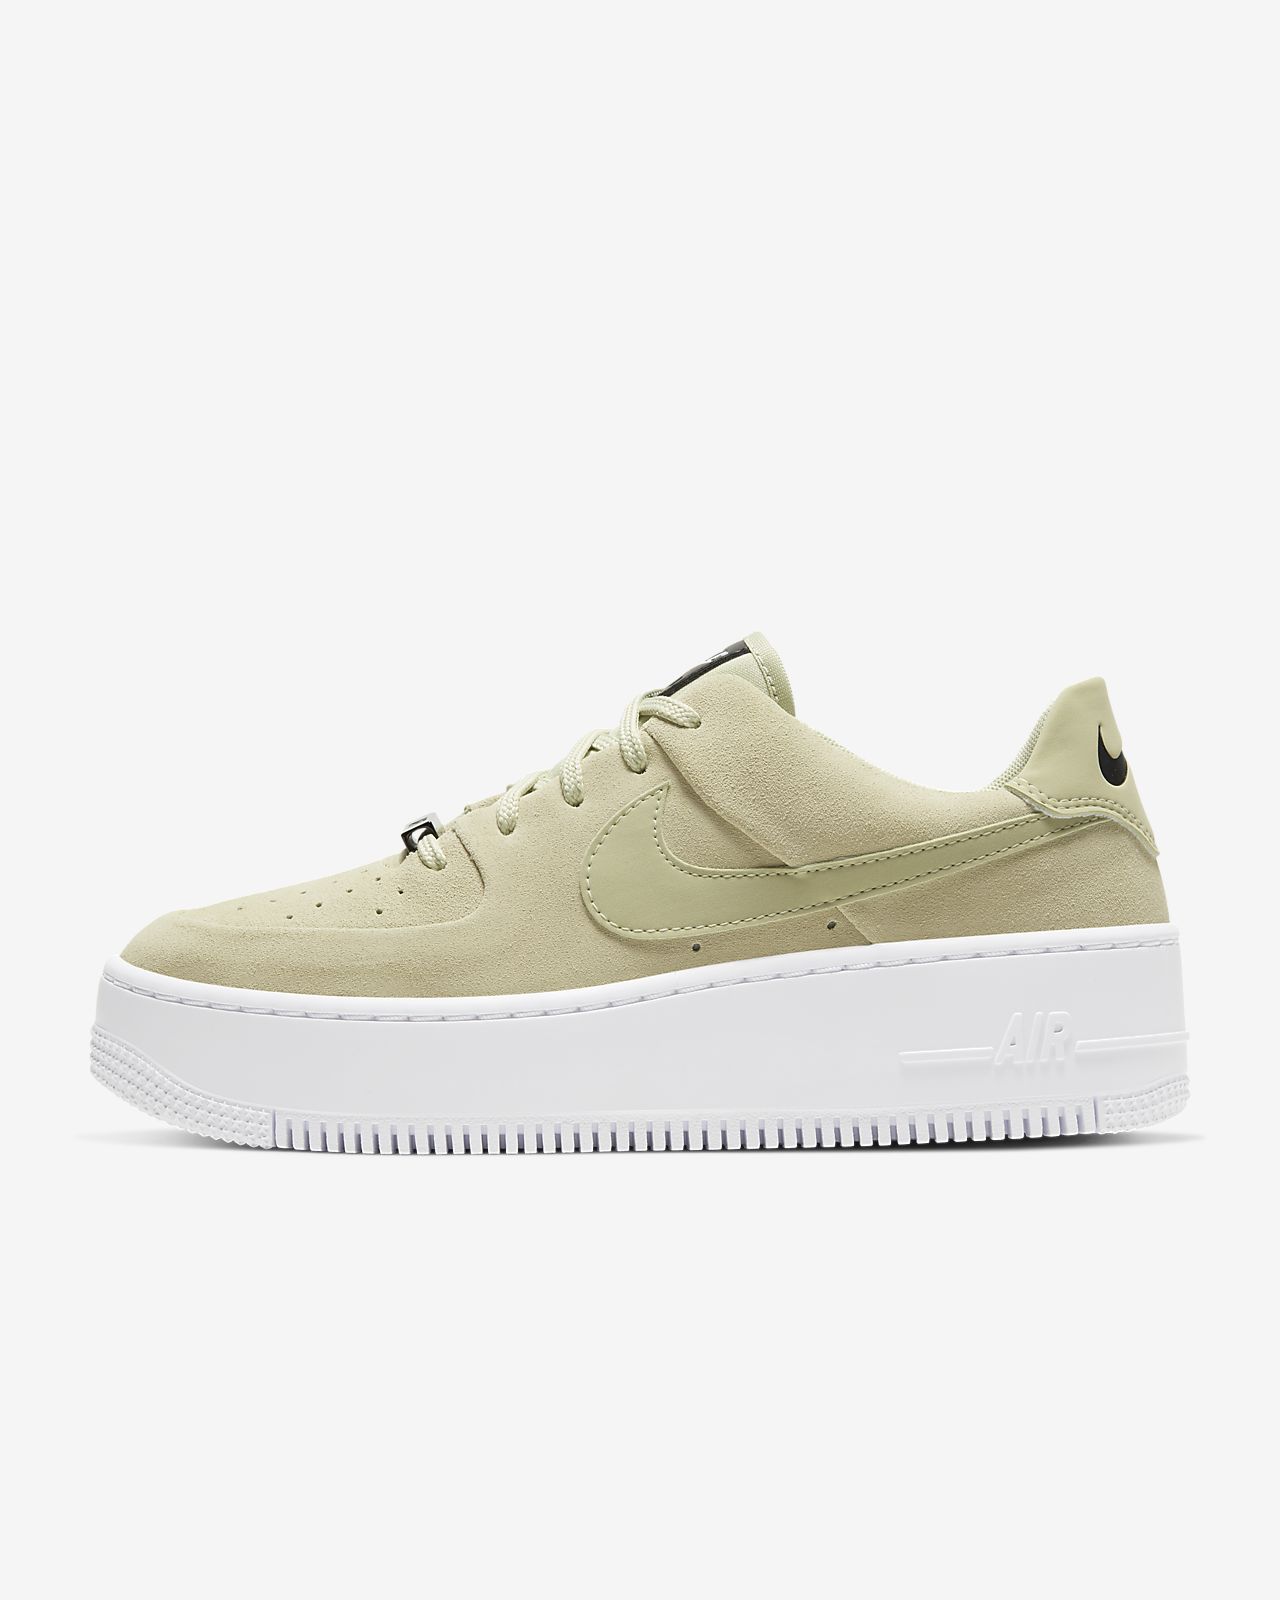 nike air force 1 femme suede